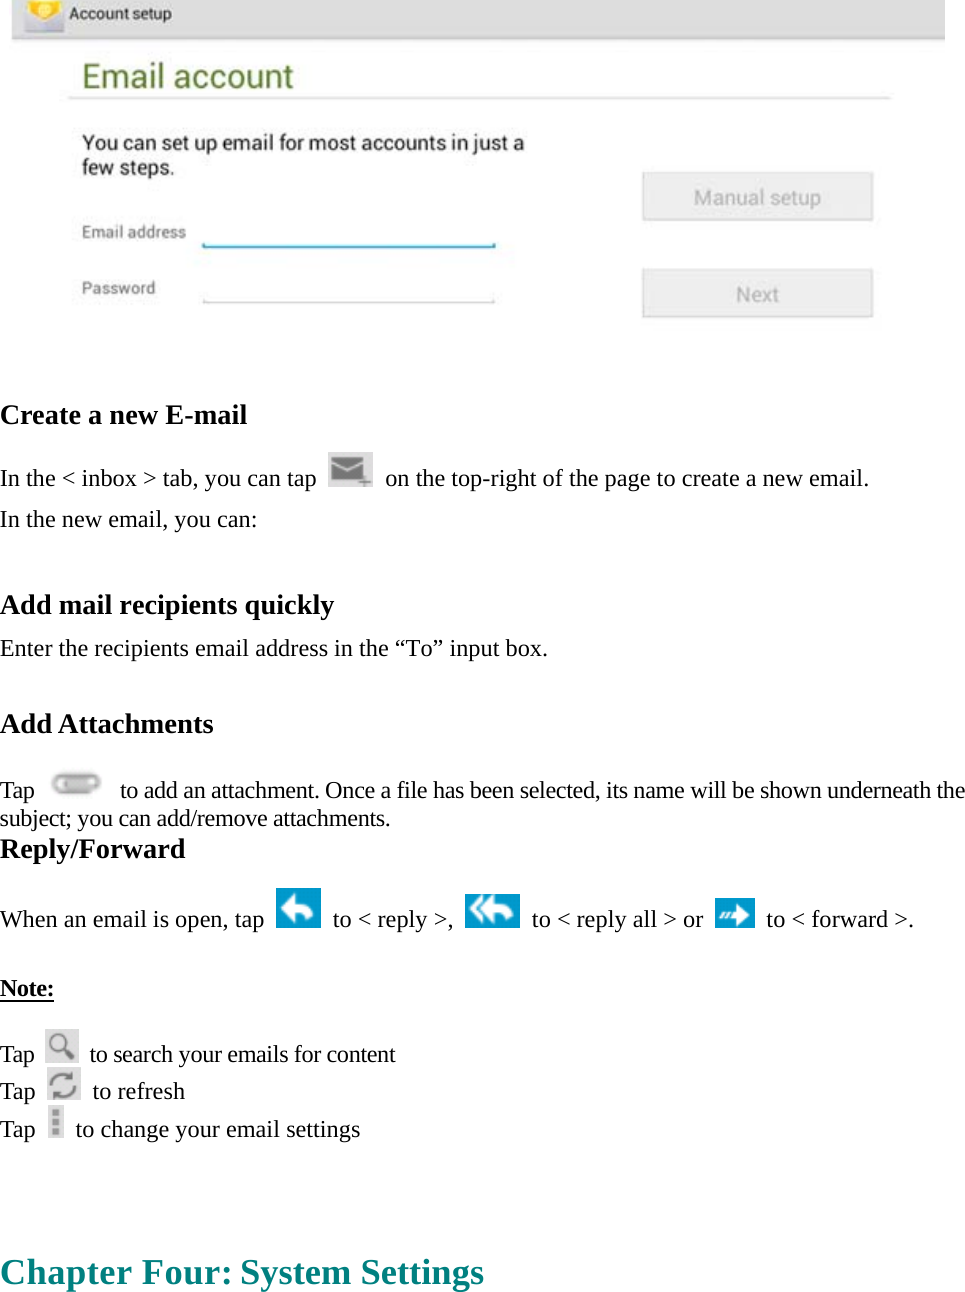    Create a new E-mail  In the &lt; inbox &gt; tab, you can tap    on the top-right of the page to create a new email.   In the new email, you can:    Add mail recipients quickly Enter the recipients email address in the “To” input box.  Add Attachments  Tap    to add an attachment. Once a file has been selected, its name will be shown underneath the subject; you can add/remove attachments. Reply/Forward  When an email is open, tap    to &lt; reply &gt;,    to &lt; reply all &gt; or    to &lt; forward &gt;.    Note:  Tap    to search your emails for content Tap   to refresh  Tap    to change your email settings     Chapter Four: System Settings  